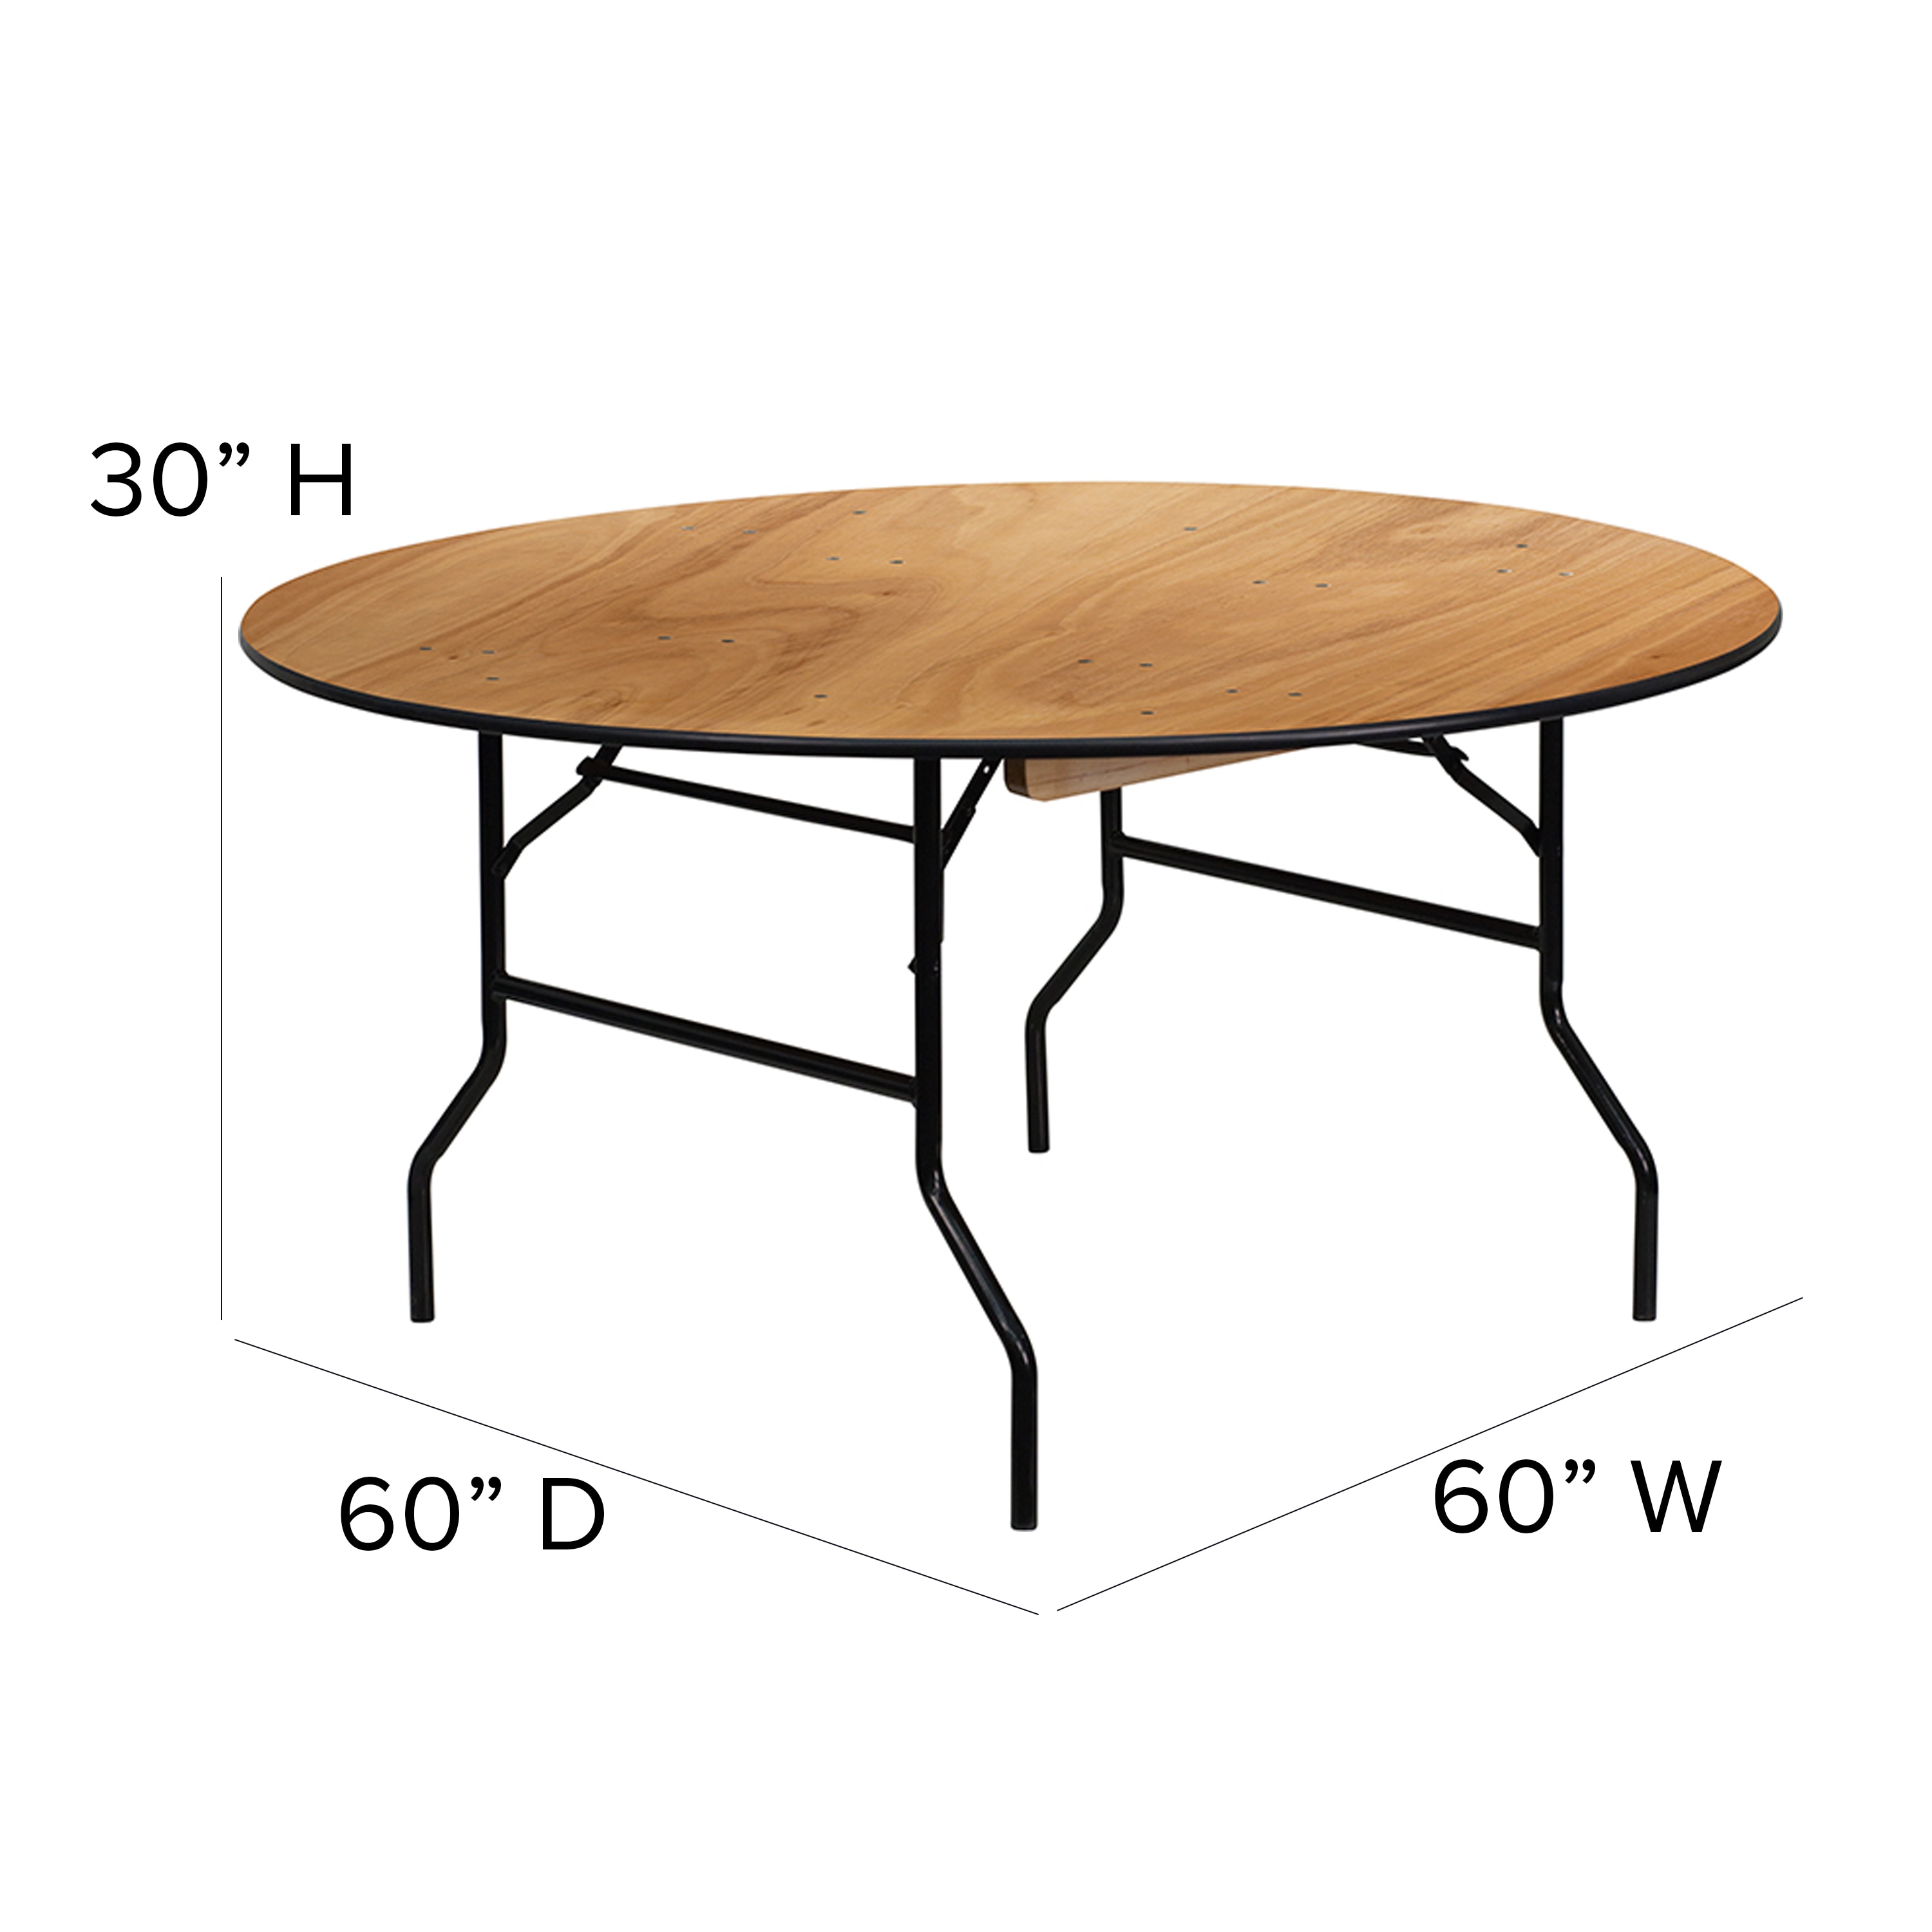 Flash Furniture 4-ft x 4-ft Indoor Round Plastic White Folding Banquet  Table (6-Person)